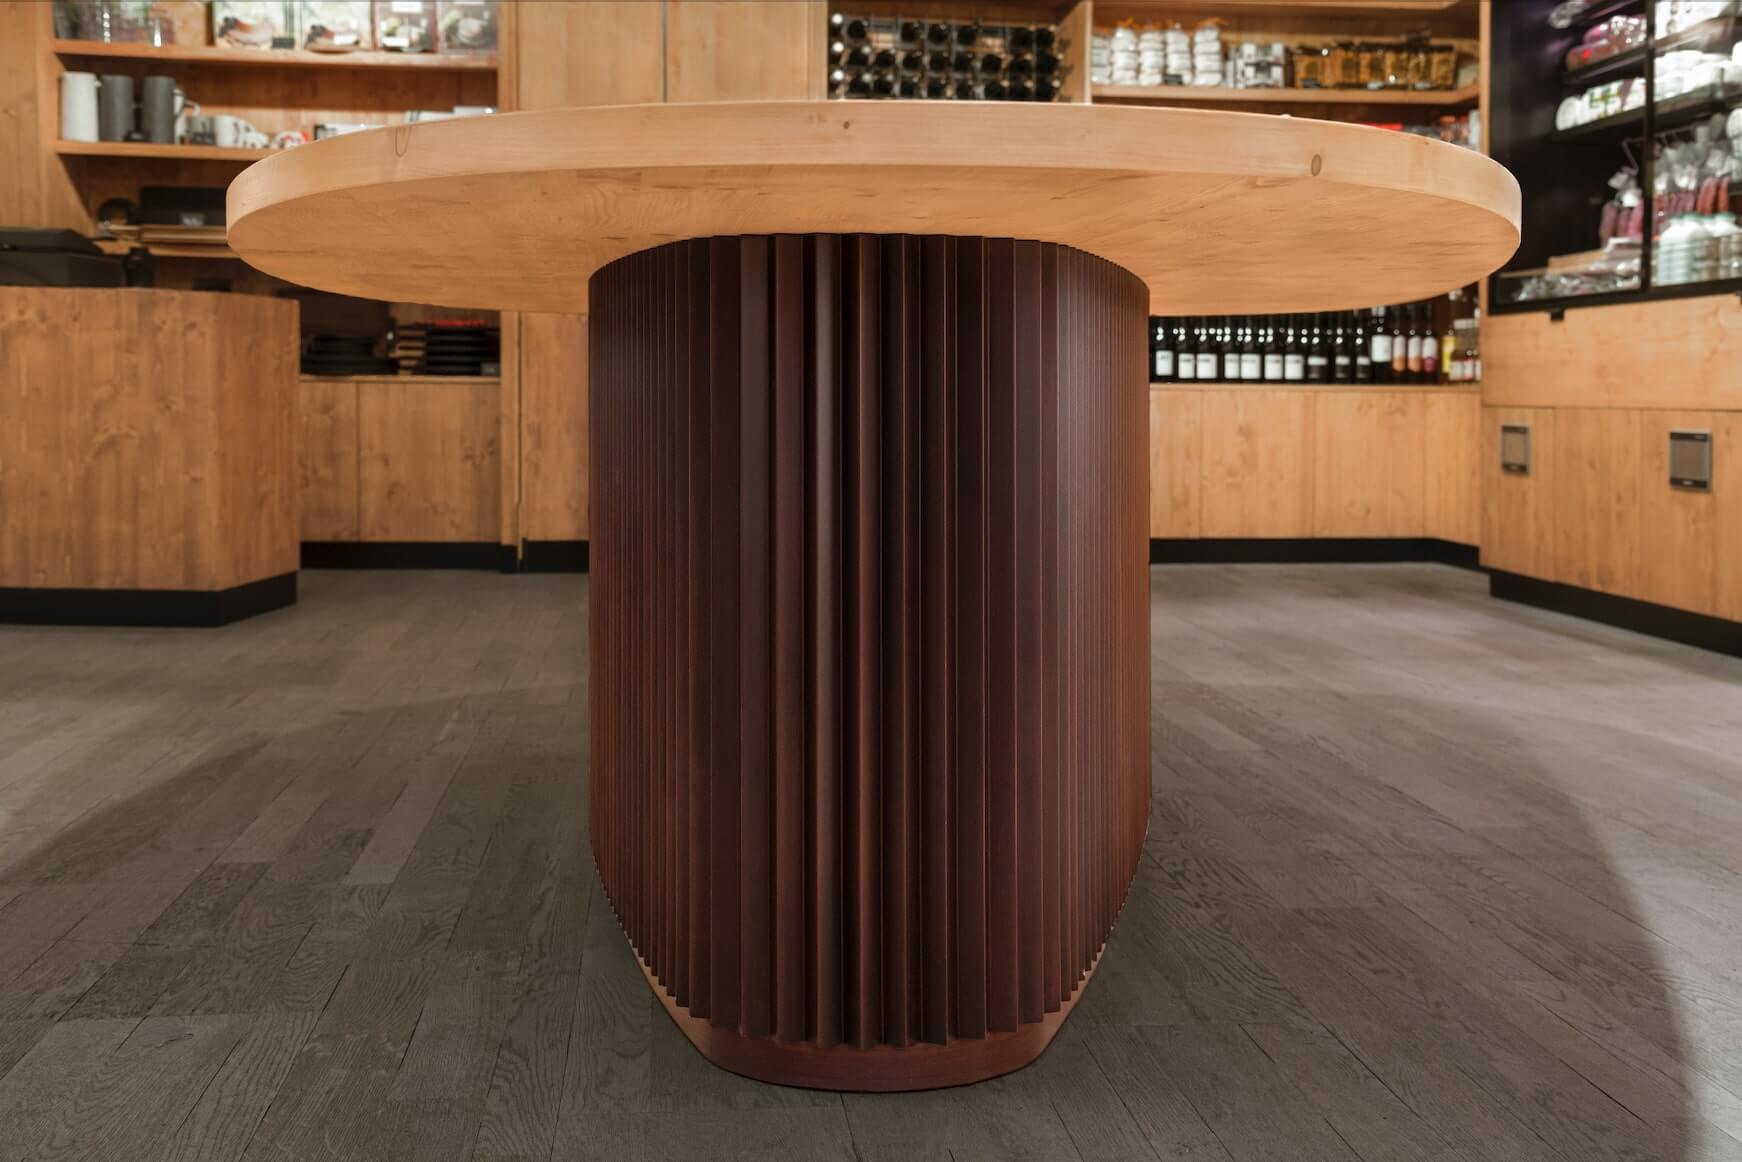 the furniture of the wood table has an oval shape